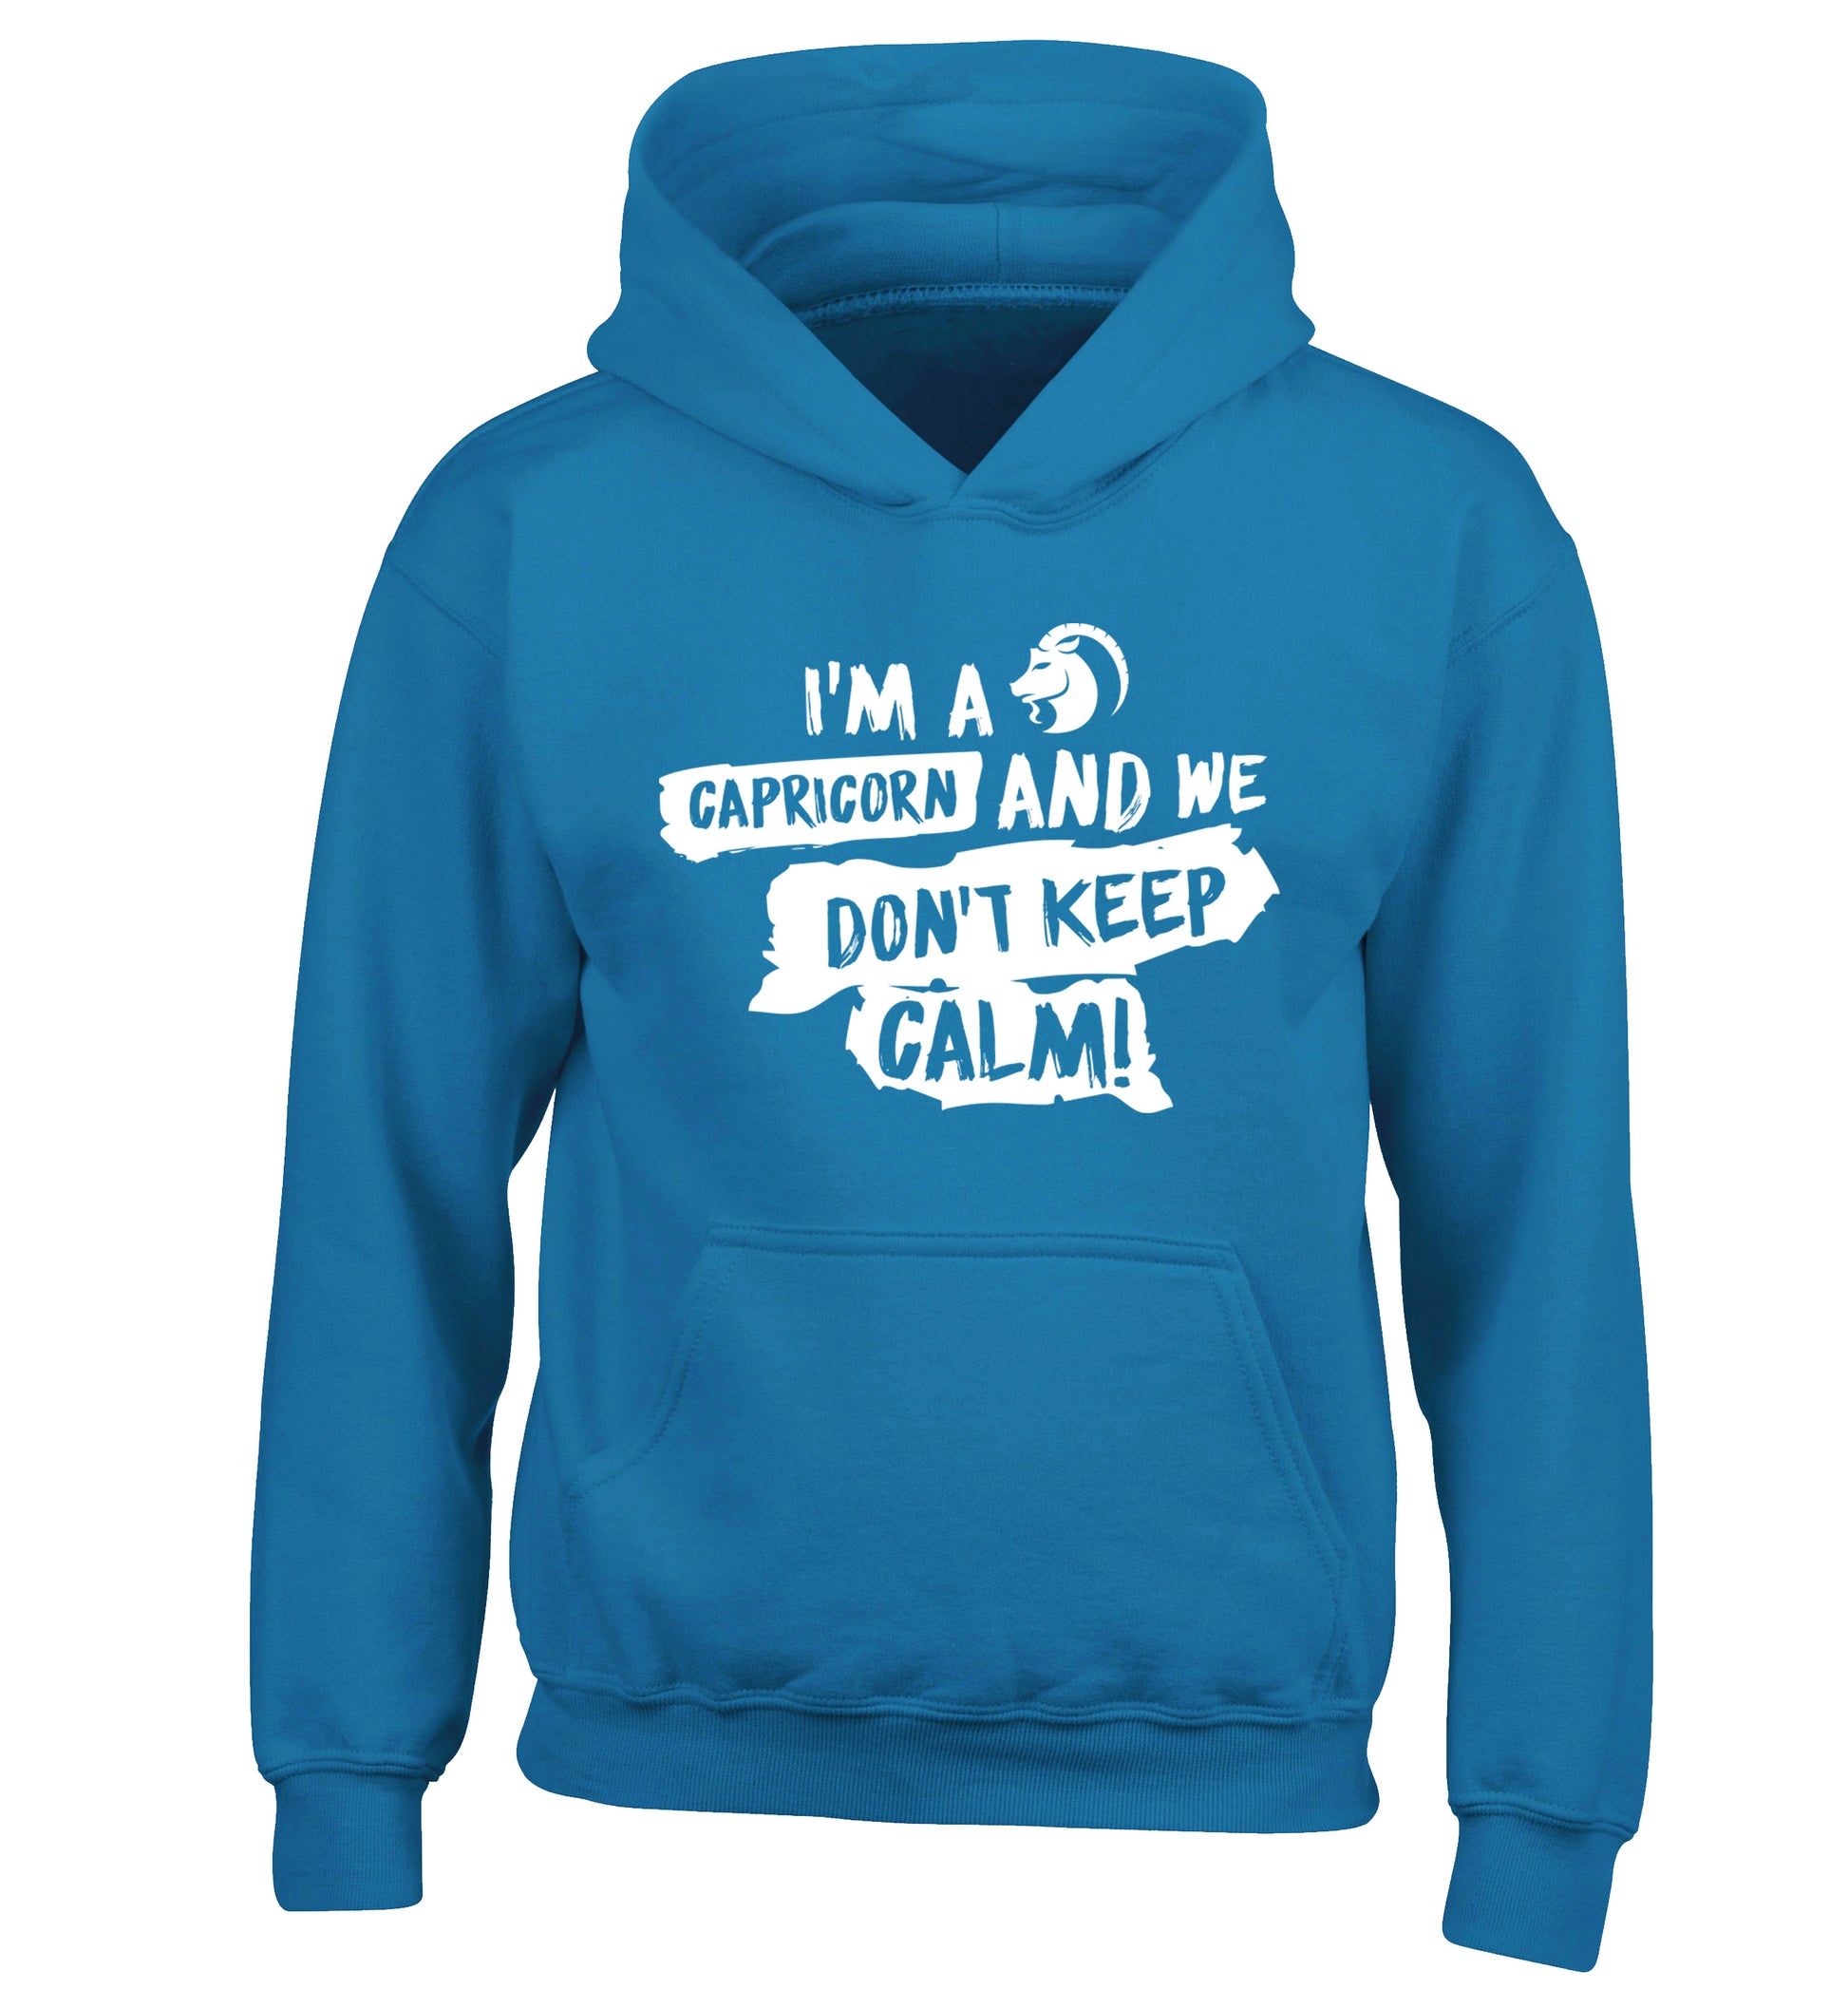 I'm a capricorn and we don't keep calm children's blue hoodie 12-13 Years